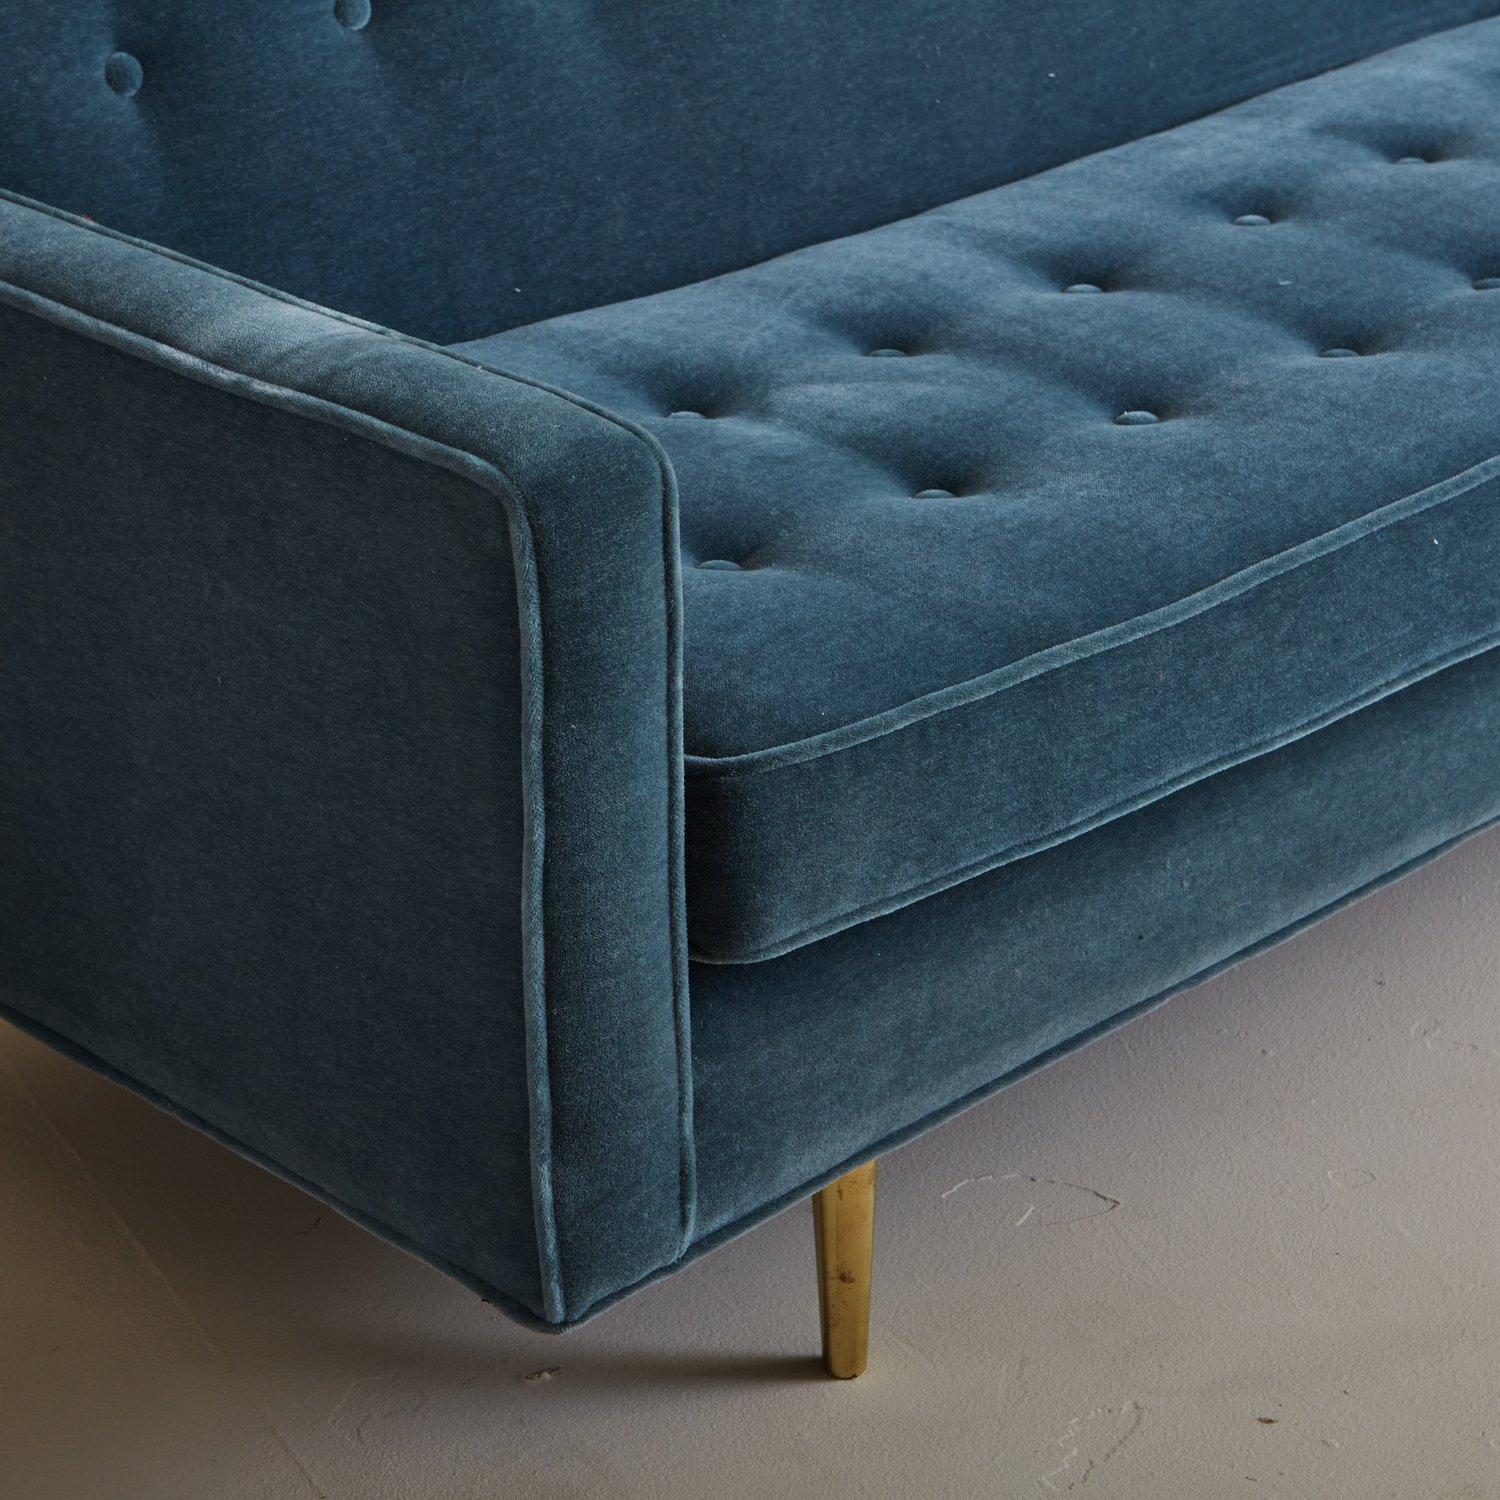 Mid-20th Century Tufted Sofa in Blue Mohair Attributed to Edward Wormley for Dunbar, USA 1950s For Sale